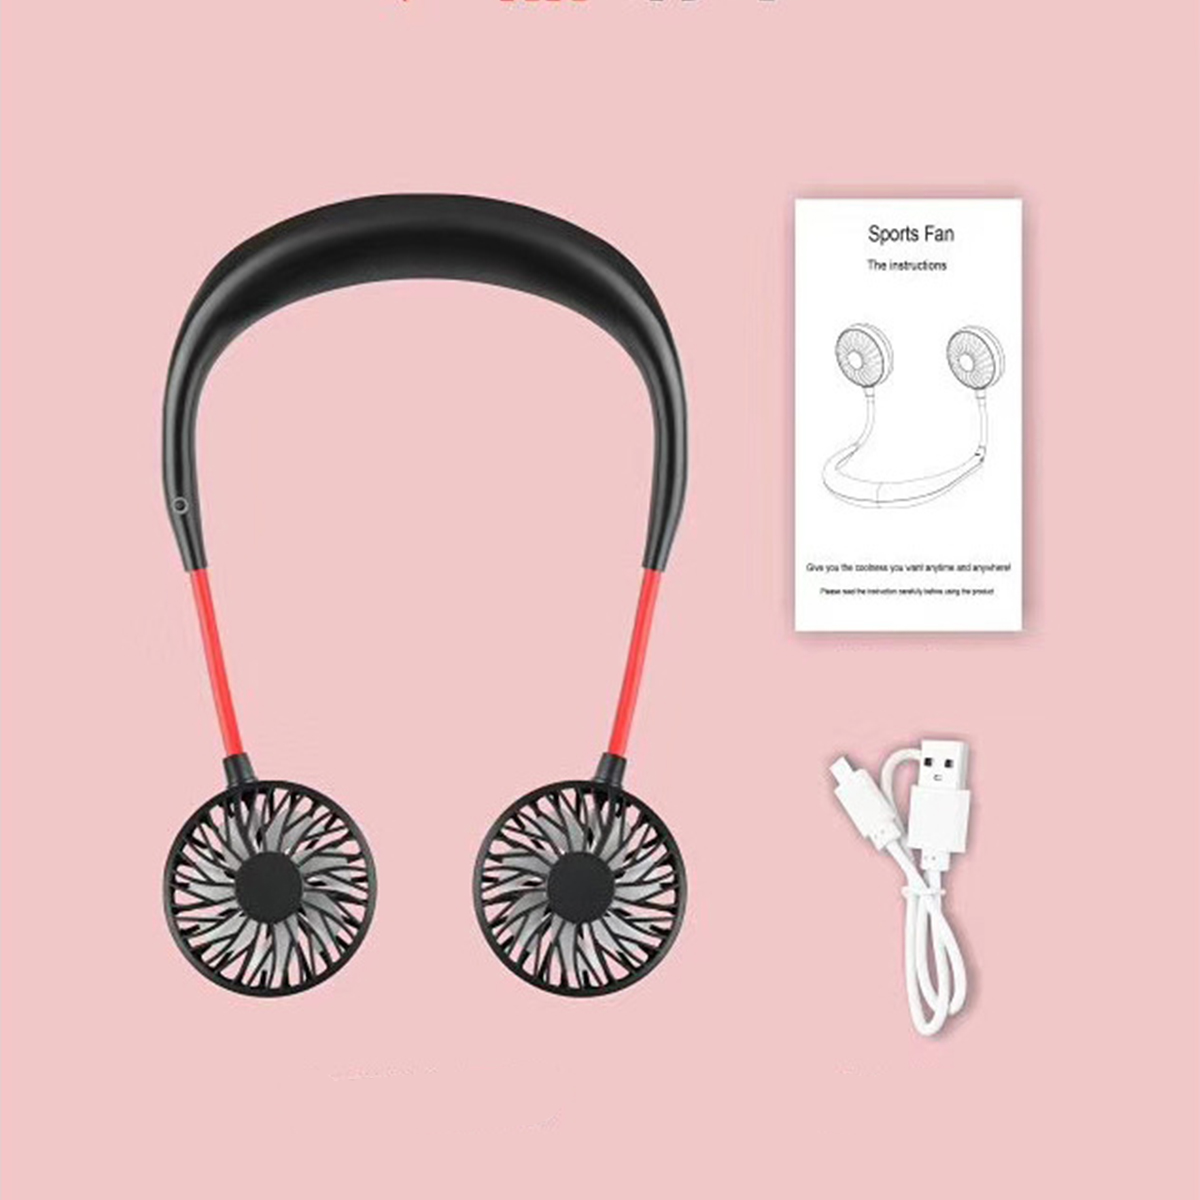 Portable-Neck-Hanging-Fan-USB-Rechargeable-Neckband-Sport-Lazy-Cooler-Double-Head-Cooling-1706696-9